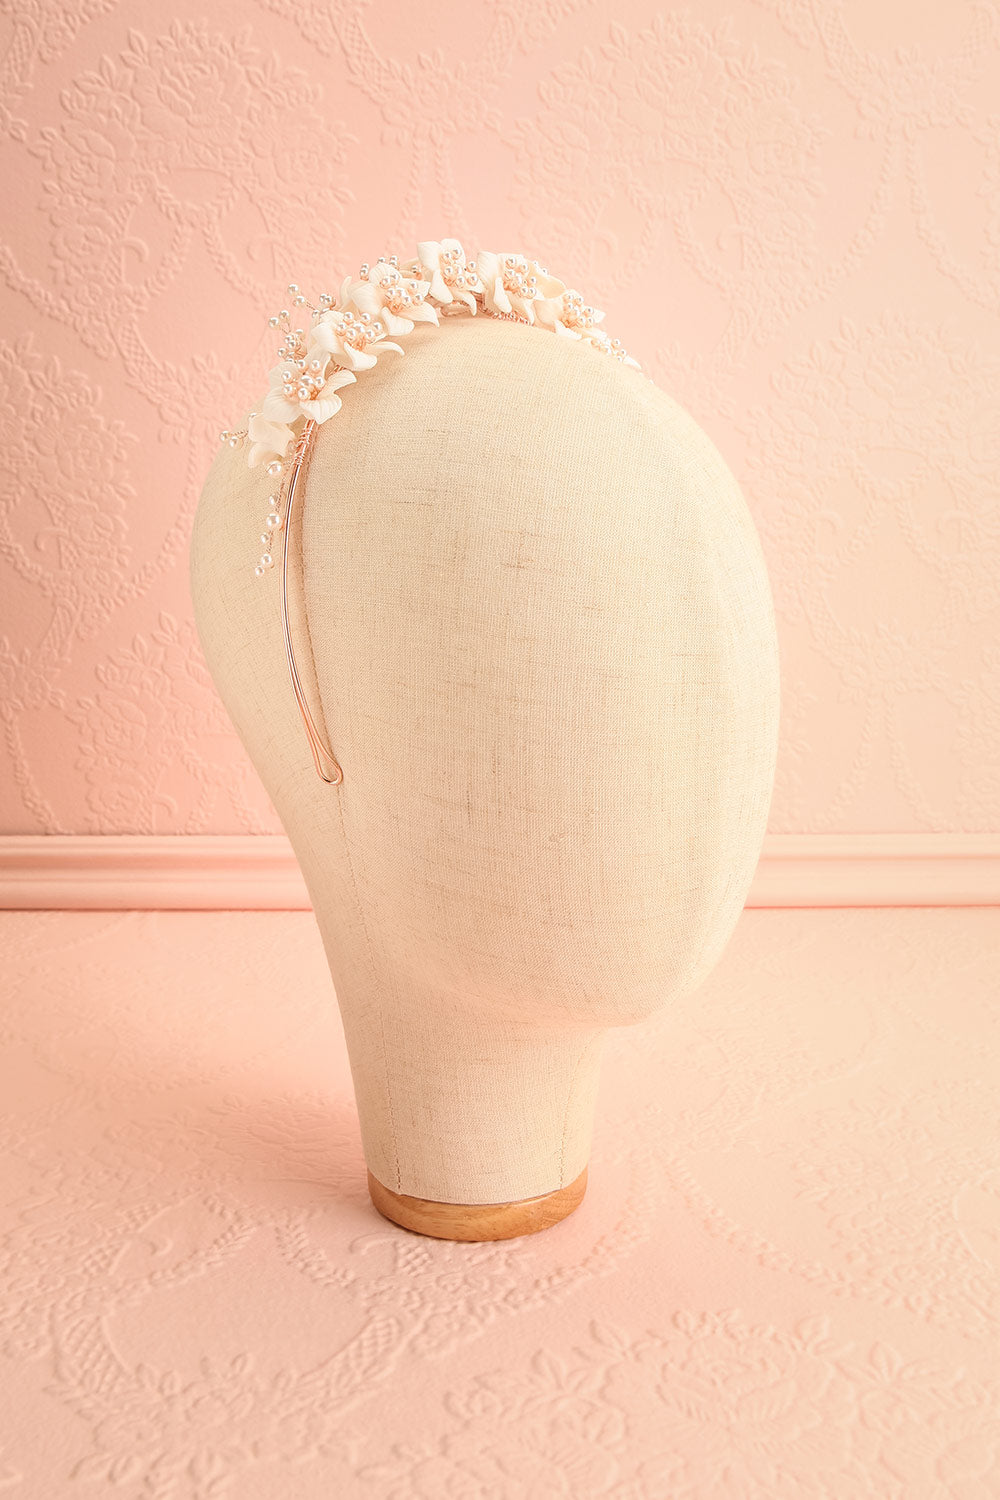 Ceohalotaxe Floral Headband w/ Pearls | Boudoir 1861 front view